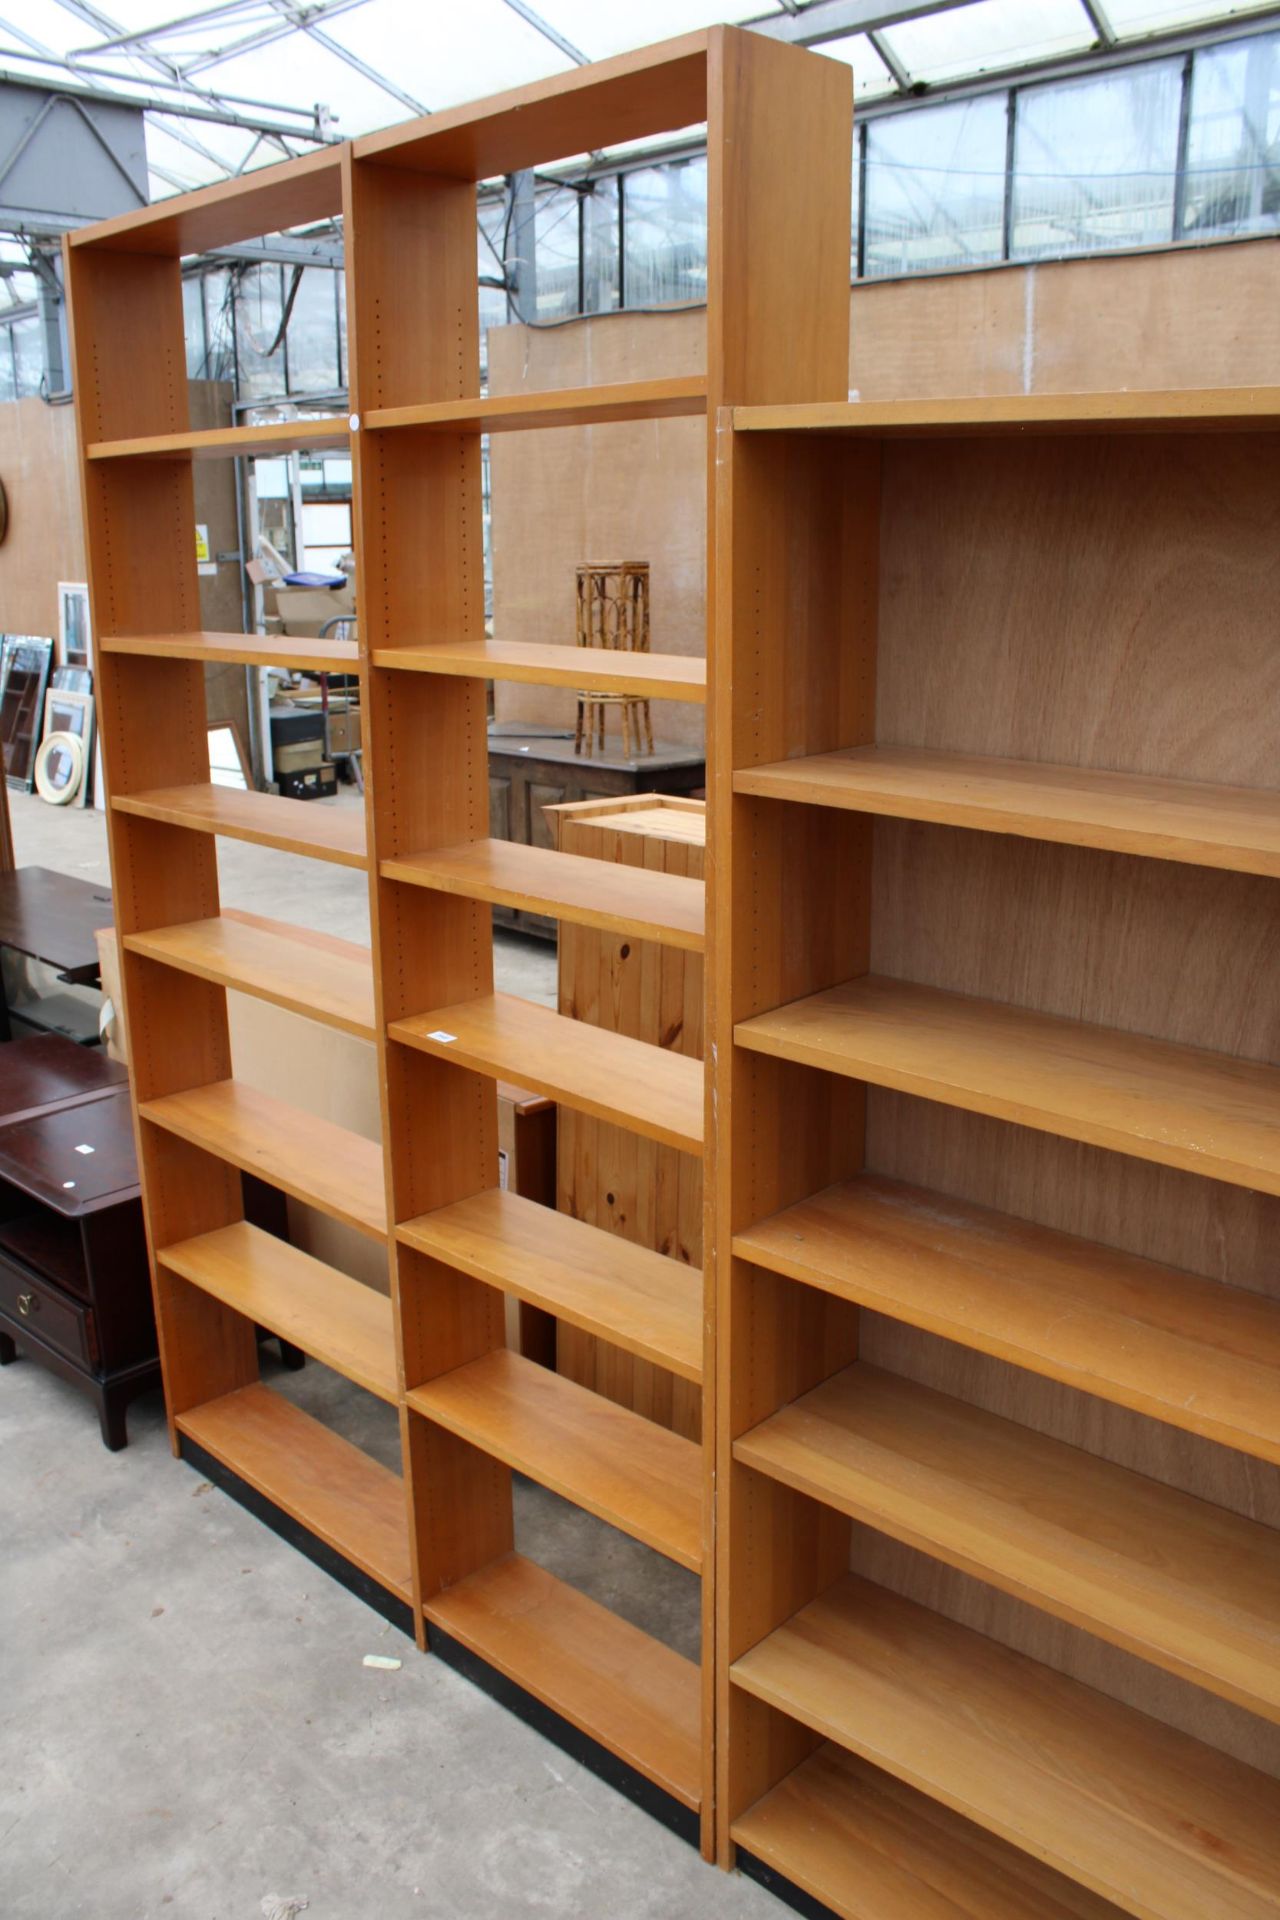 A FOURTEEN DIVISION OPEN BOOKCASE 53" WIDE